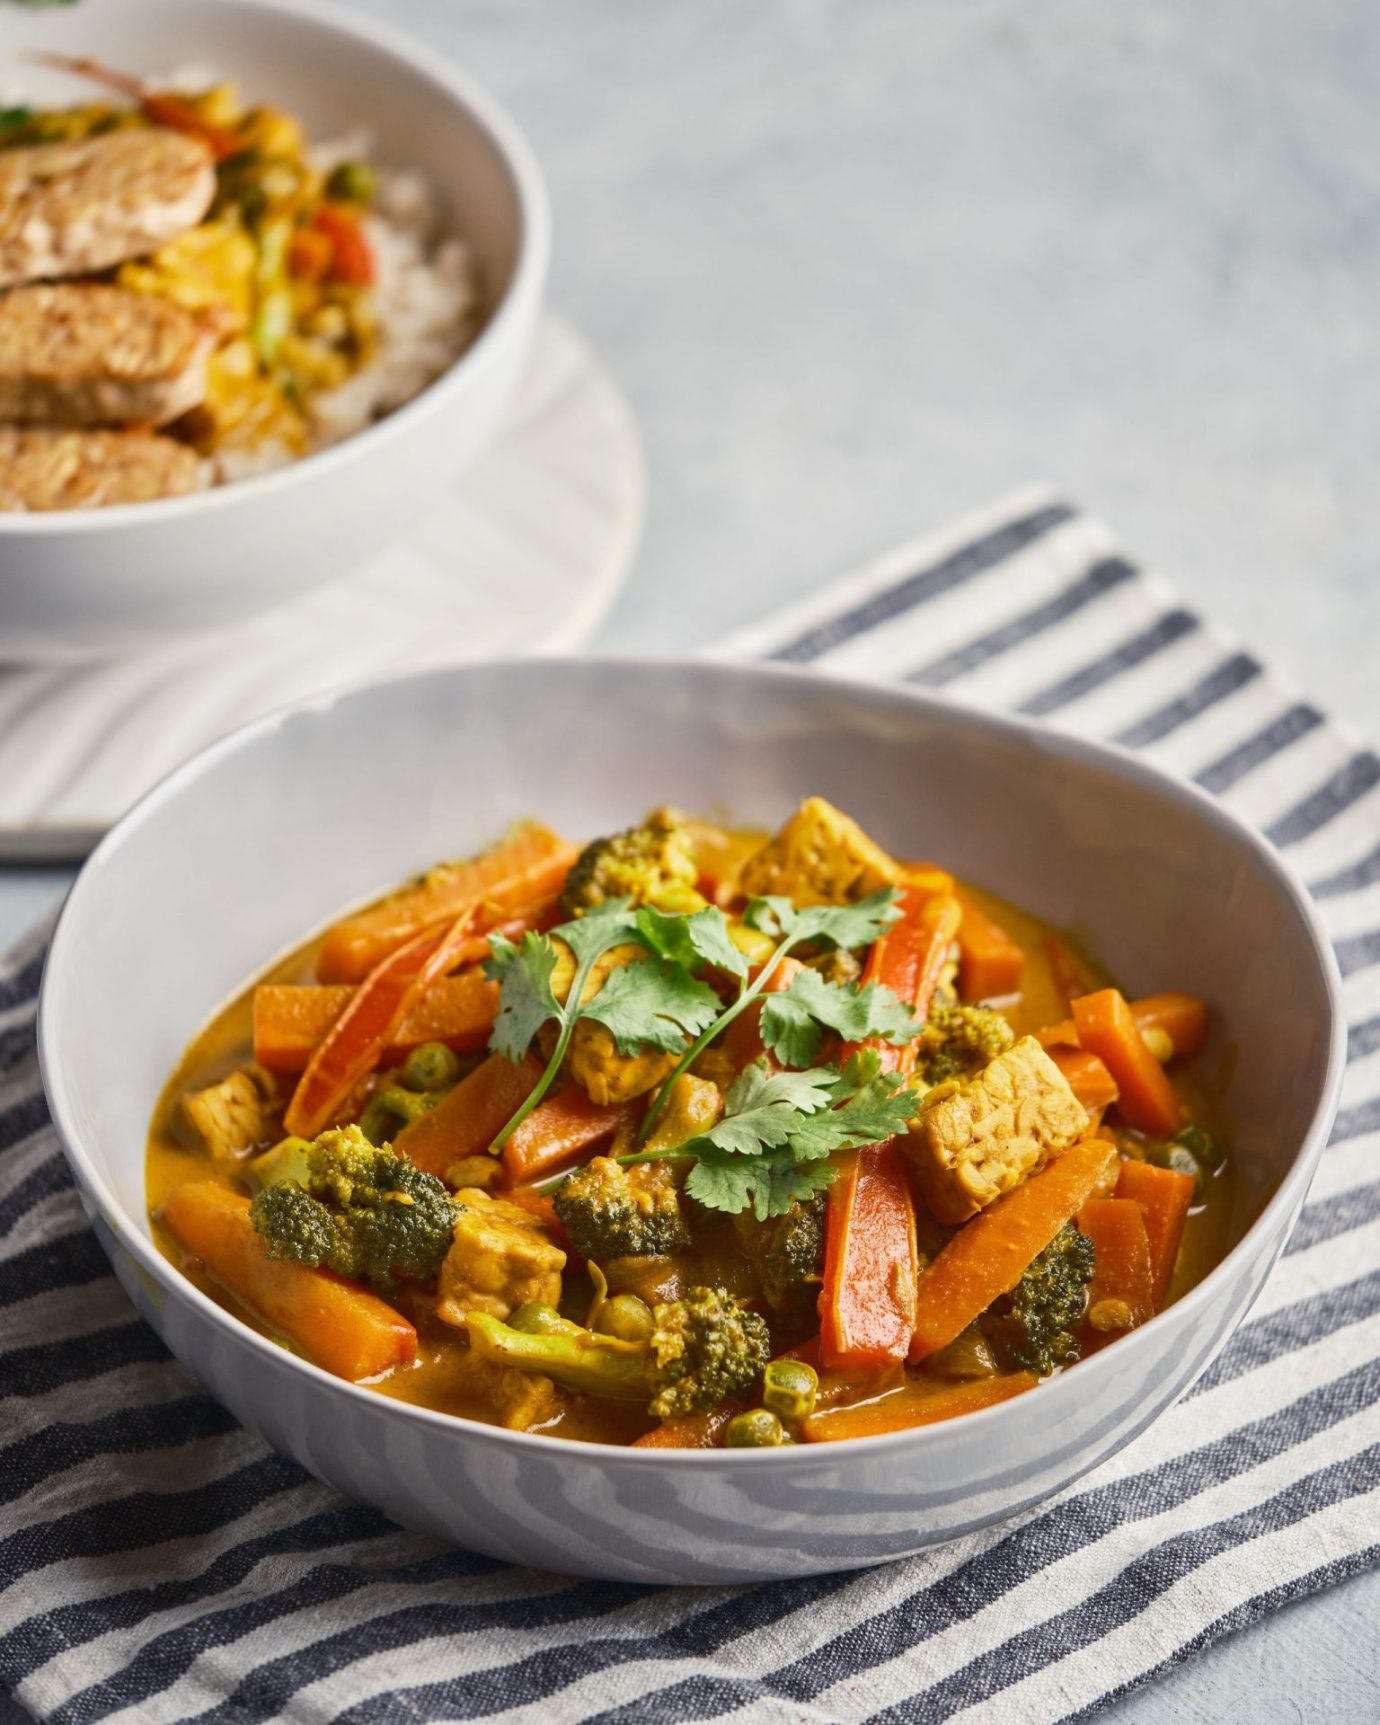 Yellow curry made with vegetables and tempeh, in a ceramic bowl